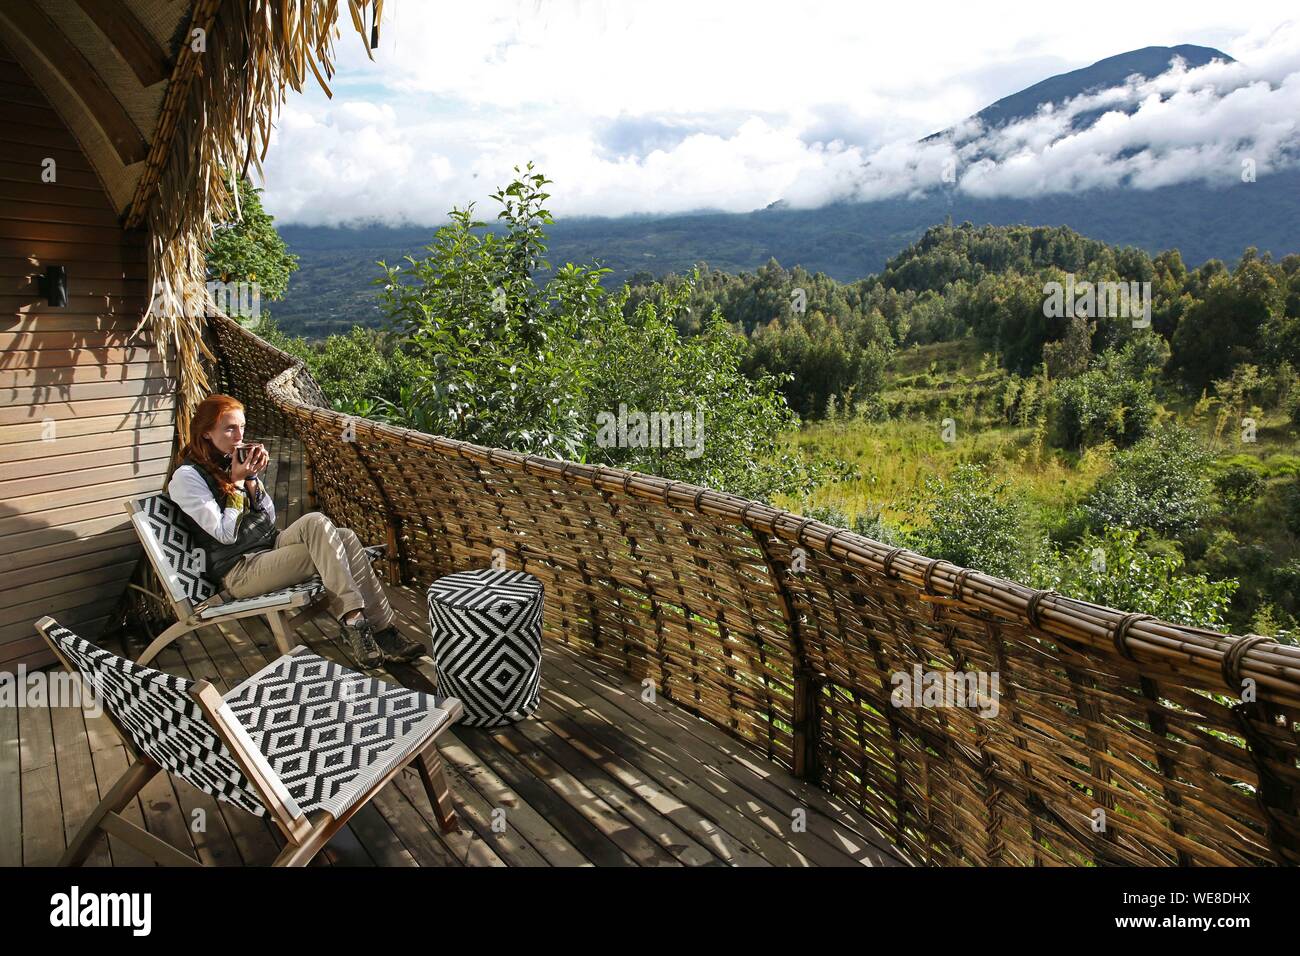 Rwanda, Volcanoes National Park, woman drinking tea on the terrace of a suite at Bisate Lodge, a lodge of the Wilnderness safaris hotel group, open on Mount Bisoke Stock Photo